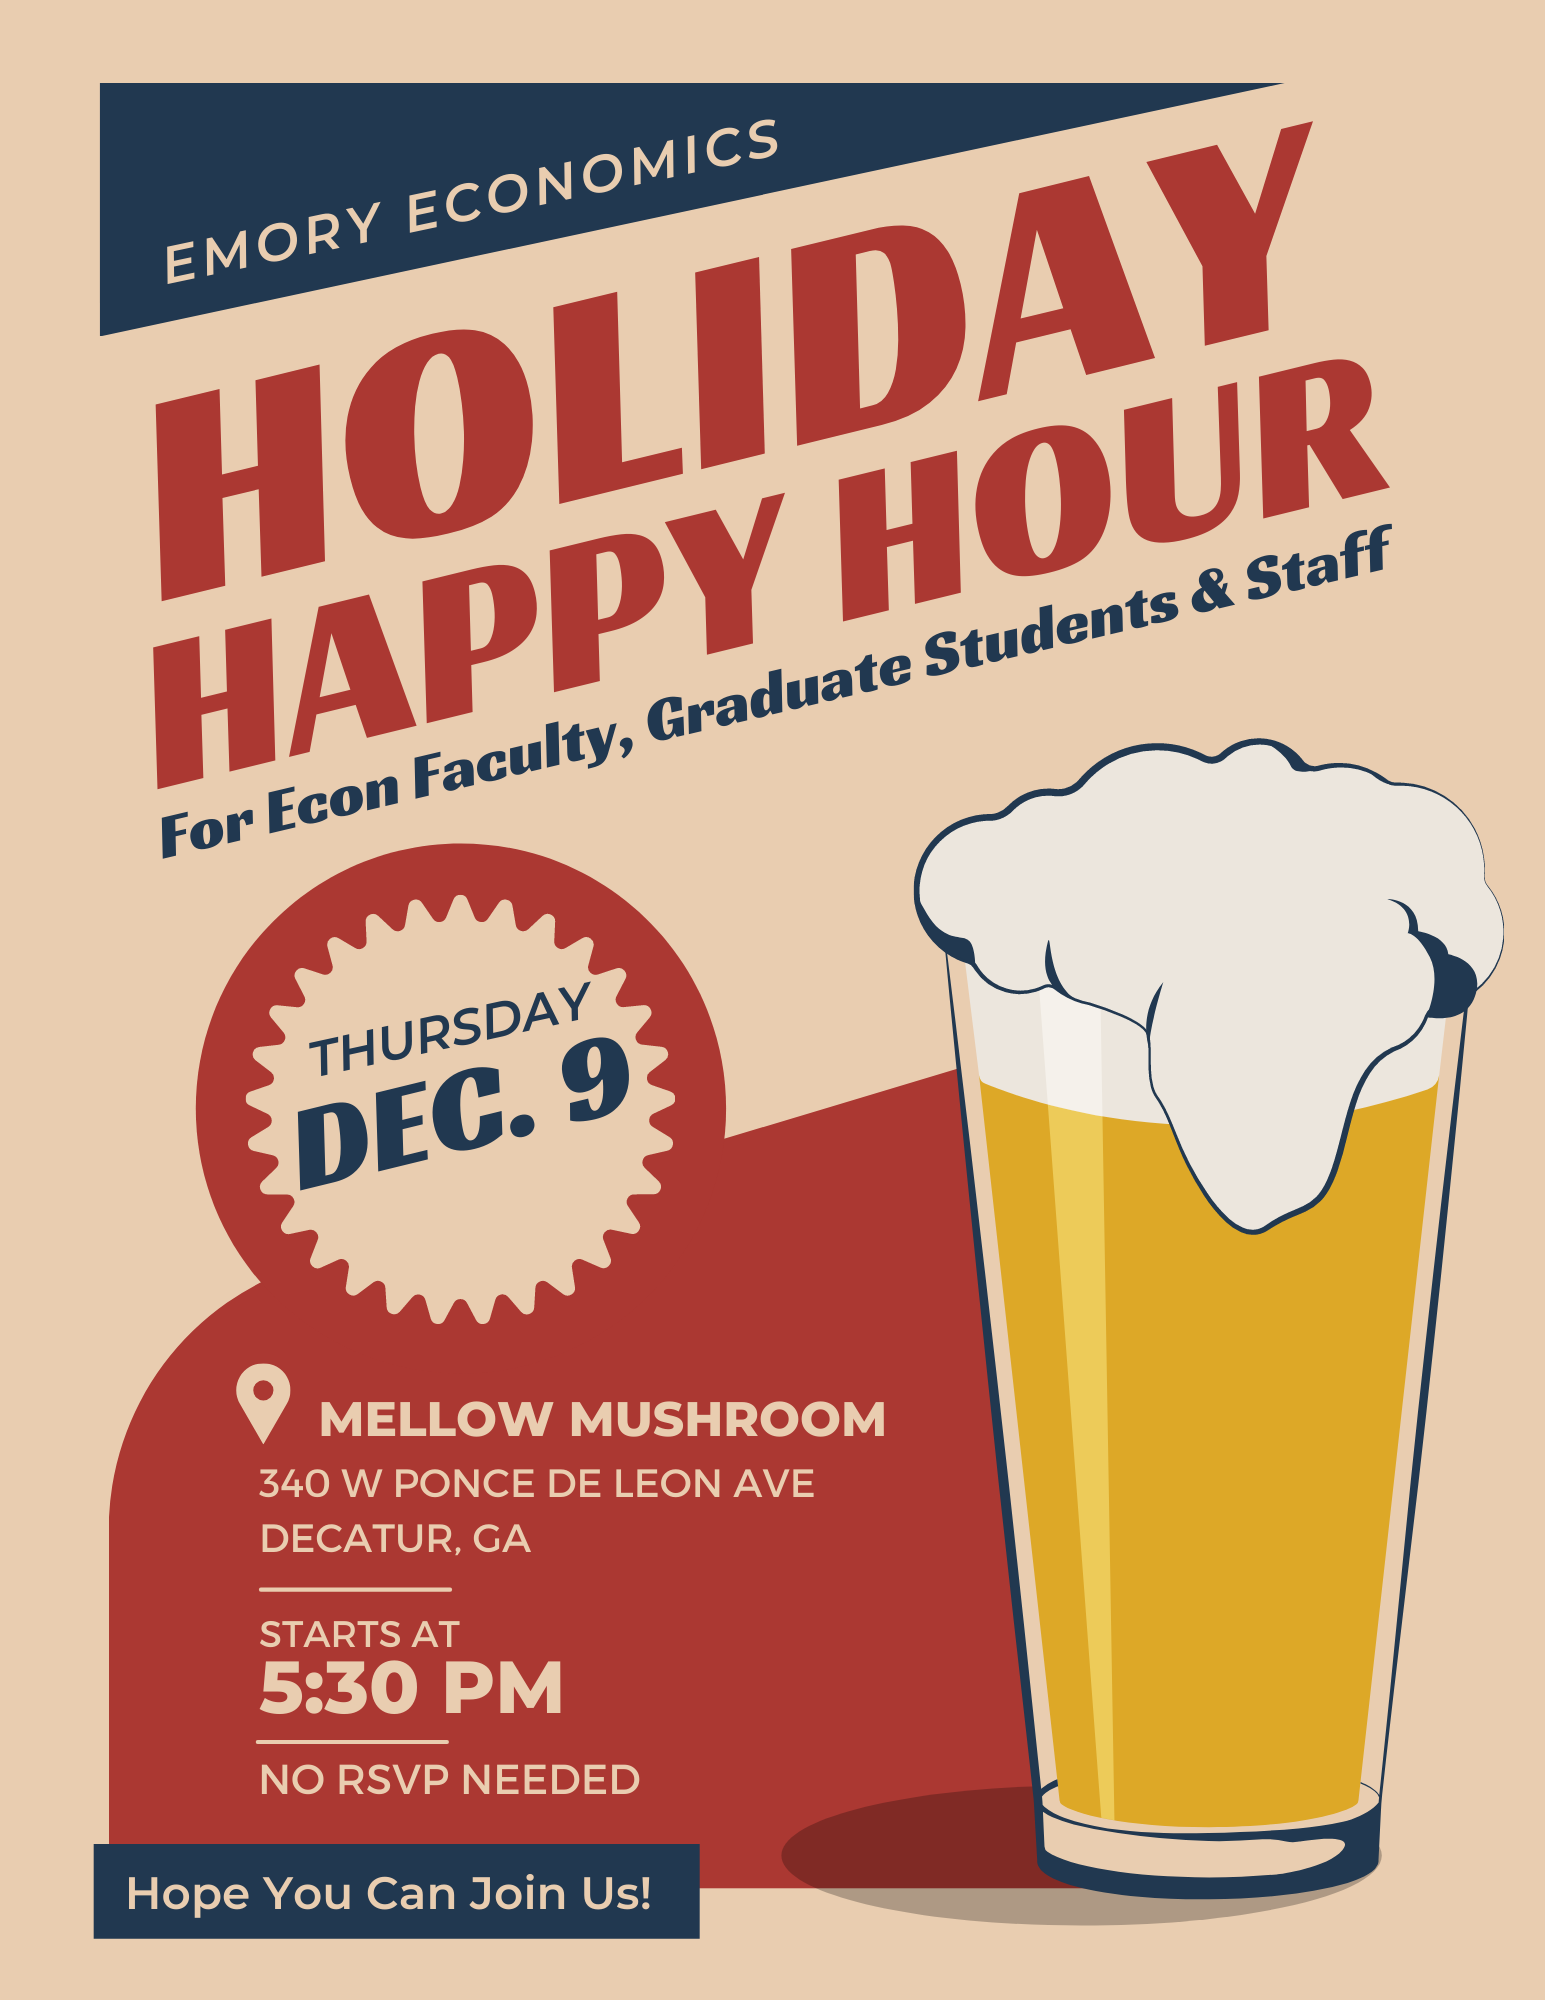 Holiday Happy Hour for Economics Faculty, Graduate Students and Staff